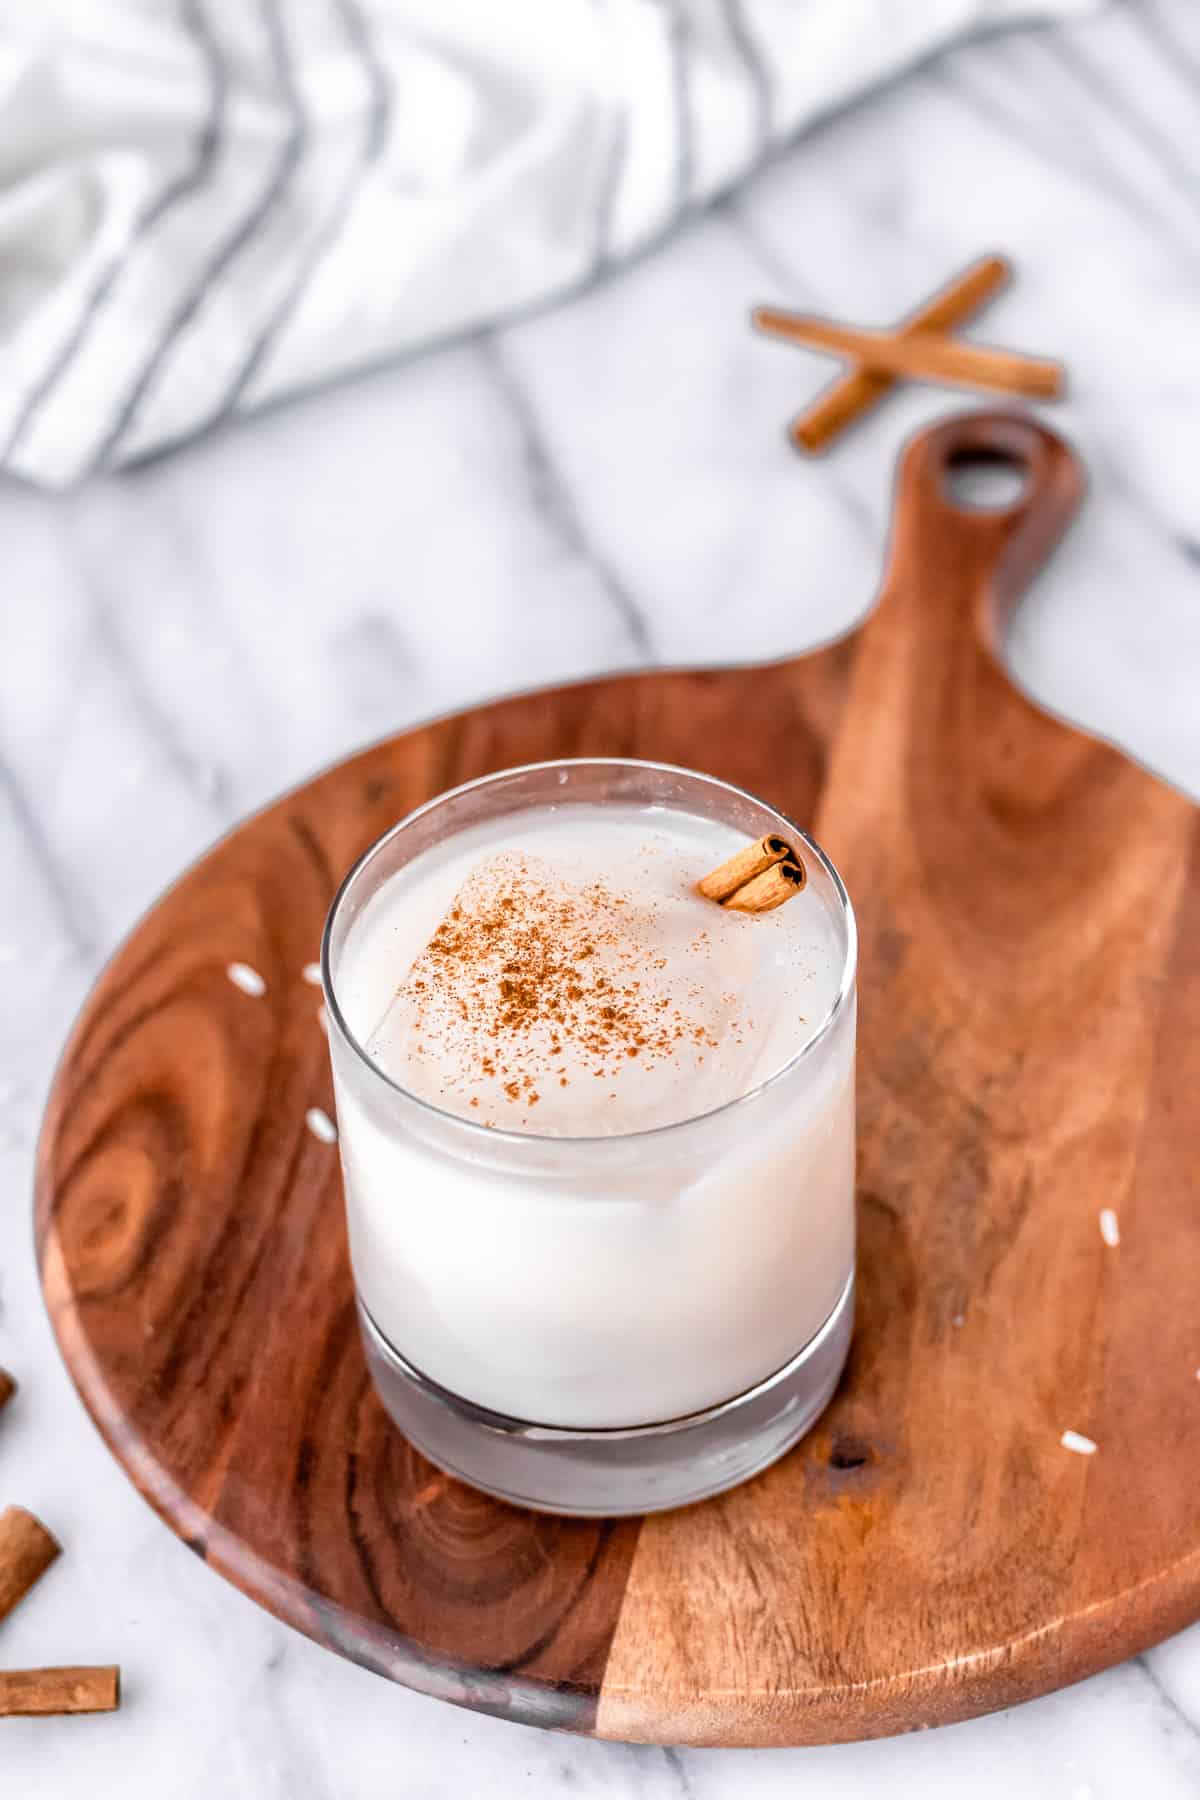 A glass of almond milk horchata on a wood server over a white backdrop with cinnamon sticks and a striped towel in the background.